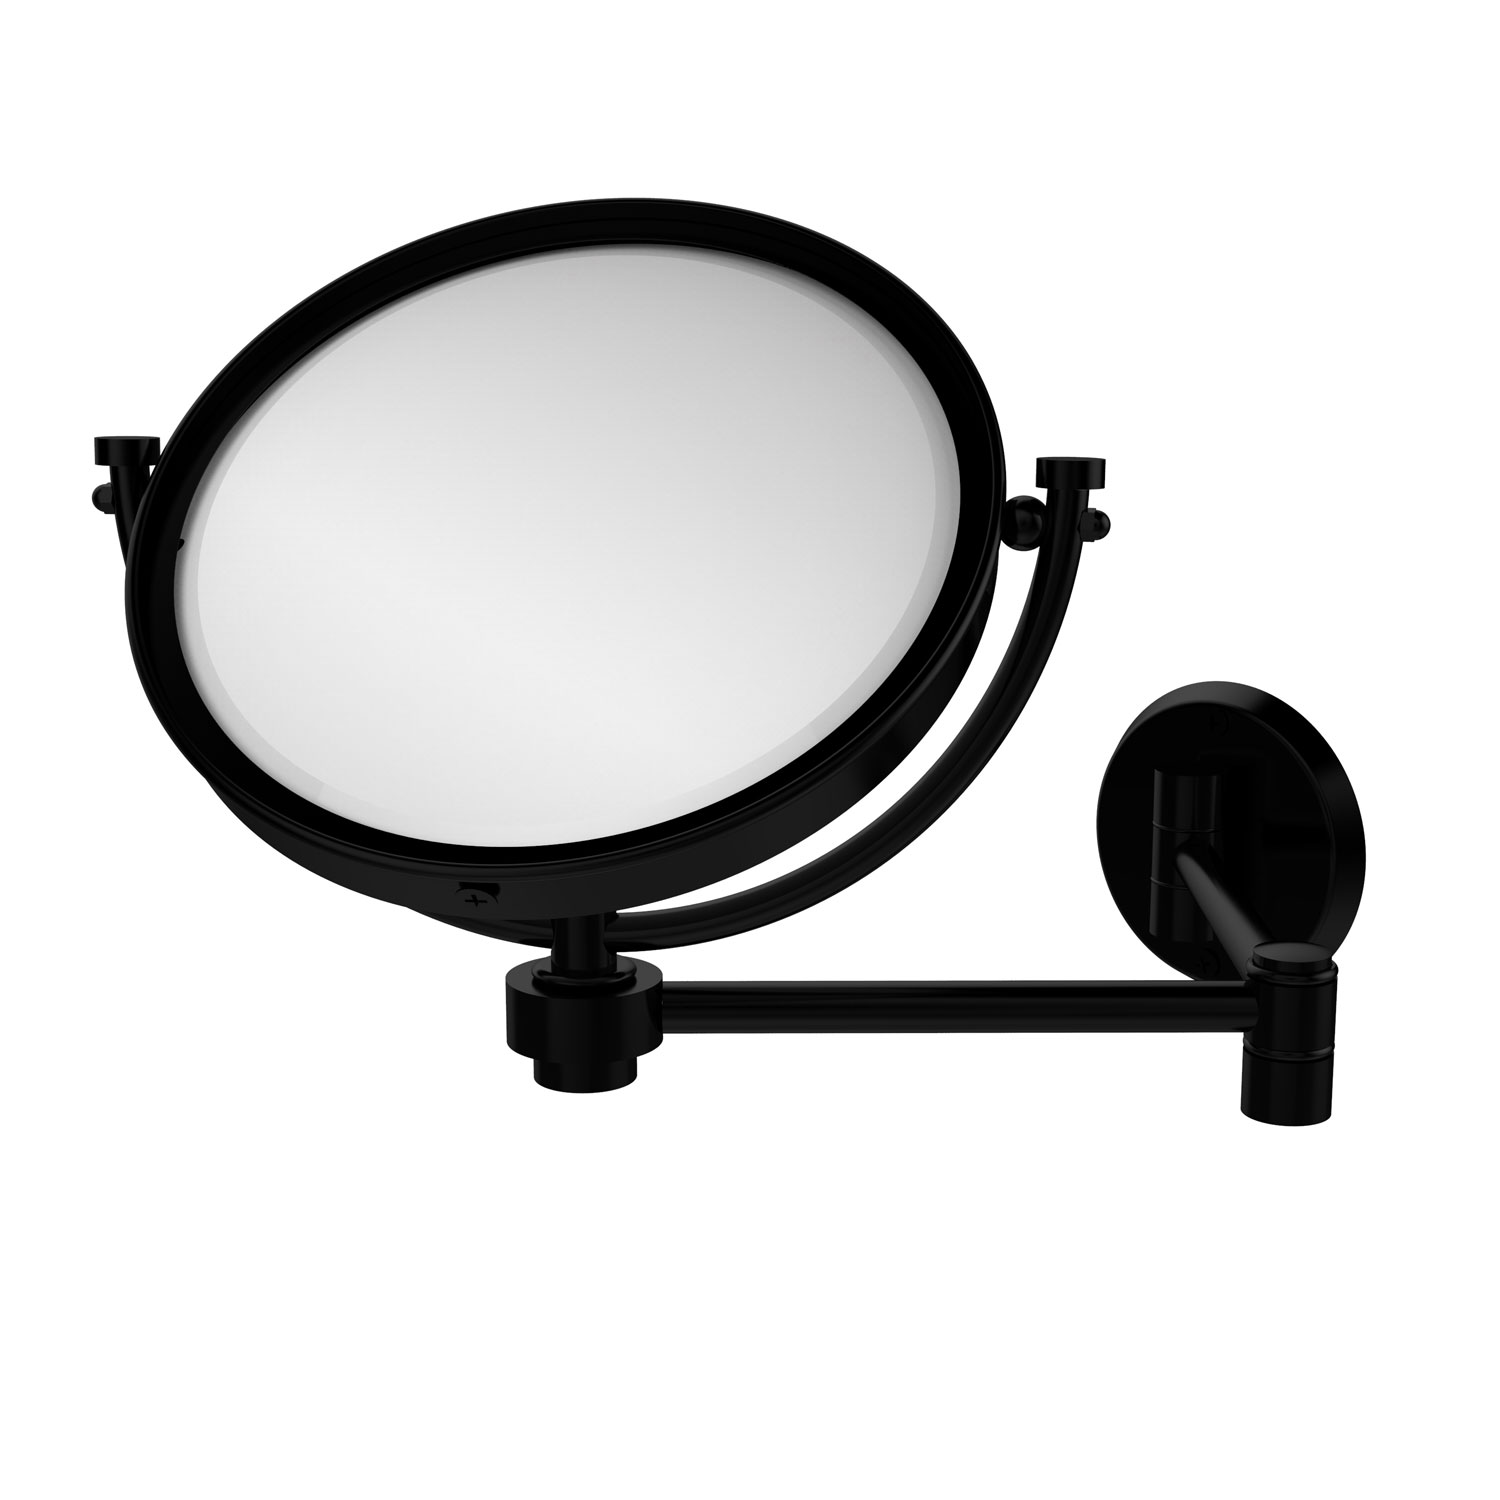 8 Inch Wall Mounted Extending Make-Up Mirror 2X Magnification, Matte Black